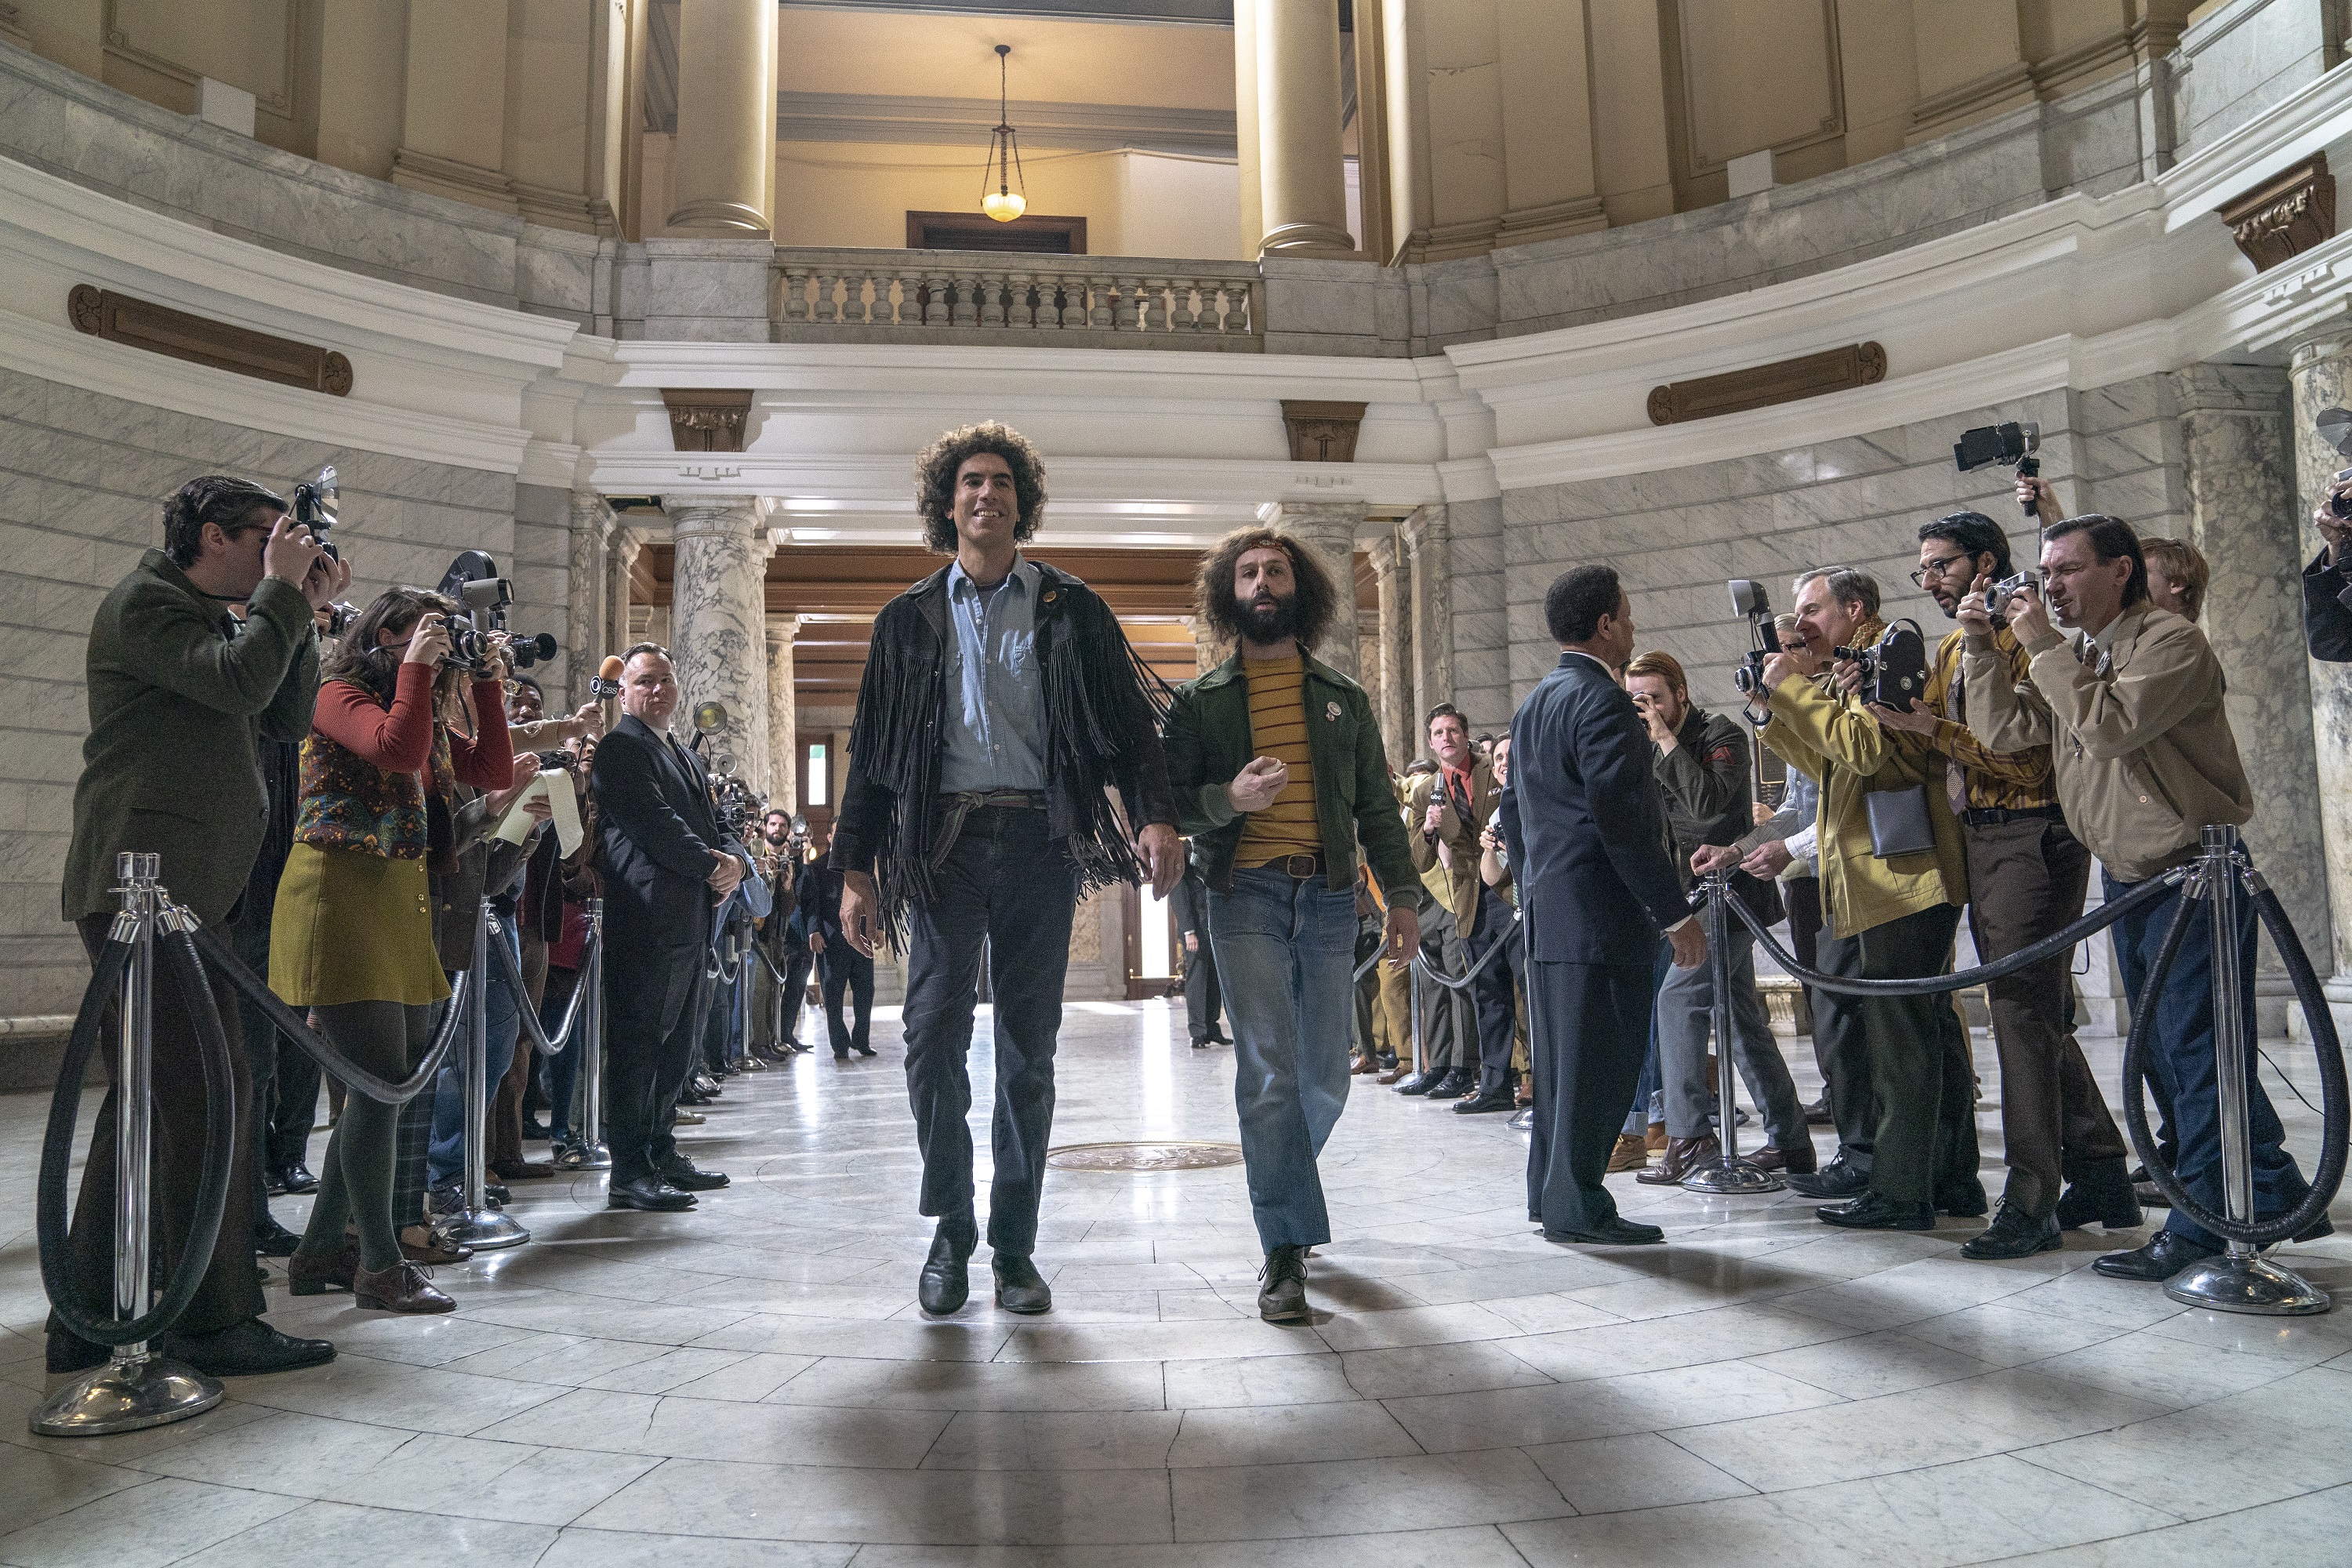 THE TRIAL OF THE CHICAGO 7 (L to R) SACHA BARON COHEN as Abbie Hoffman, JEREMY STRONG as Jerry Rubin in THE TRIAL OF THE CHICAGO 7. Cr. NIKO TAVERNISE/NETFLIX © 2020